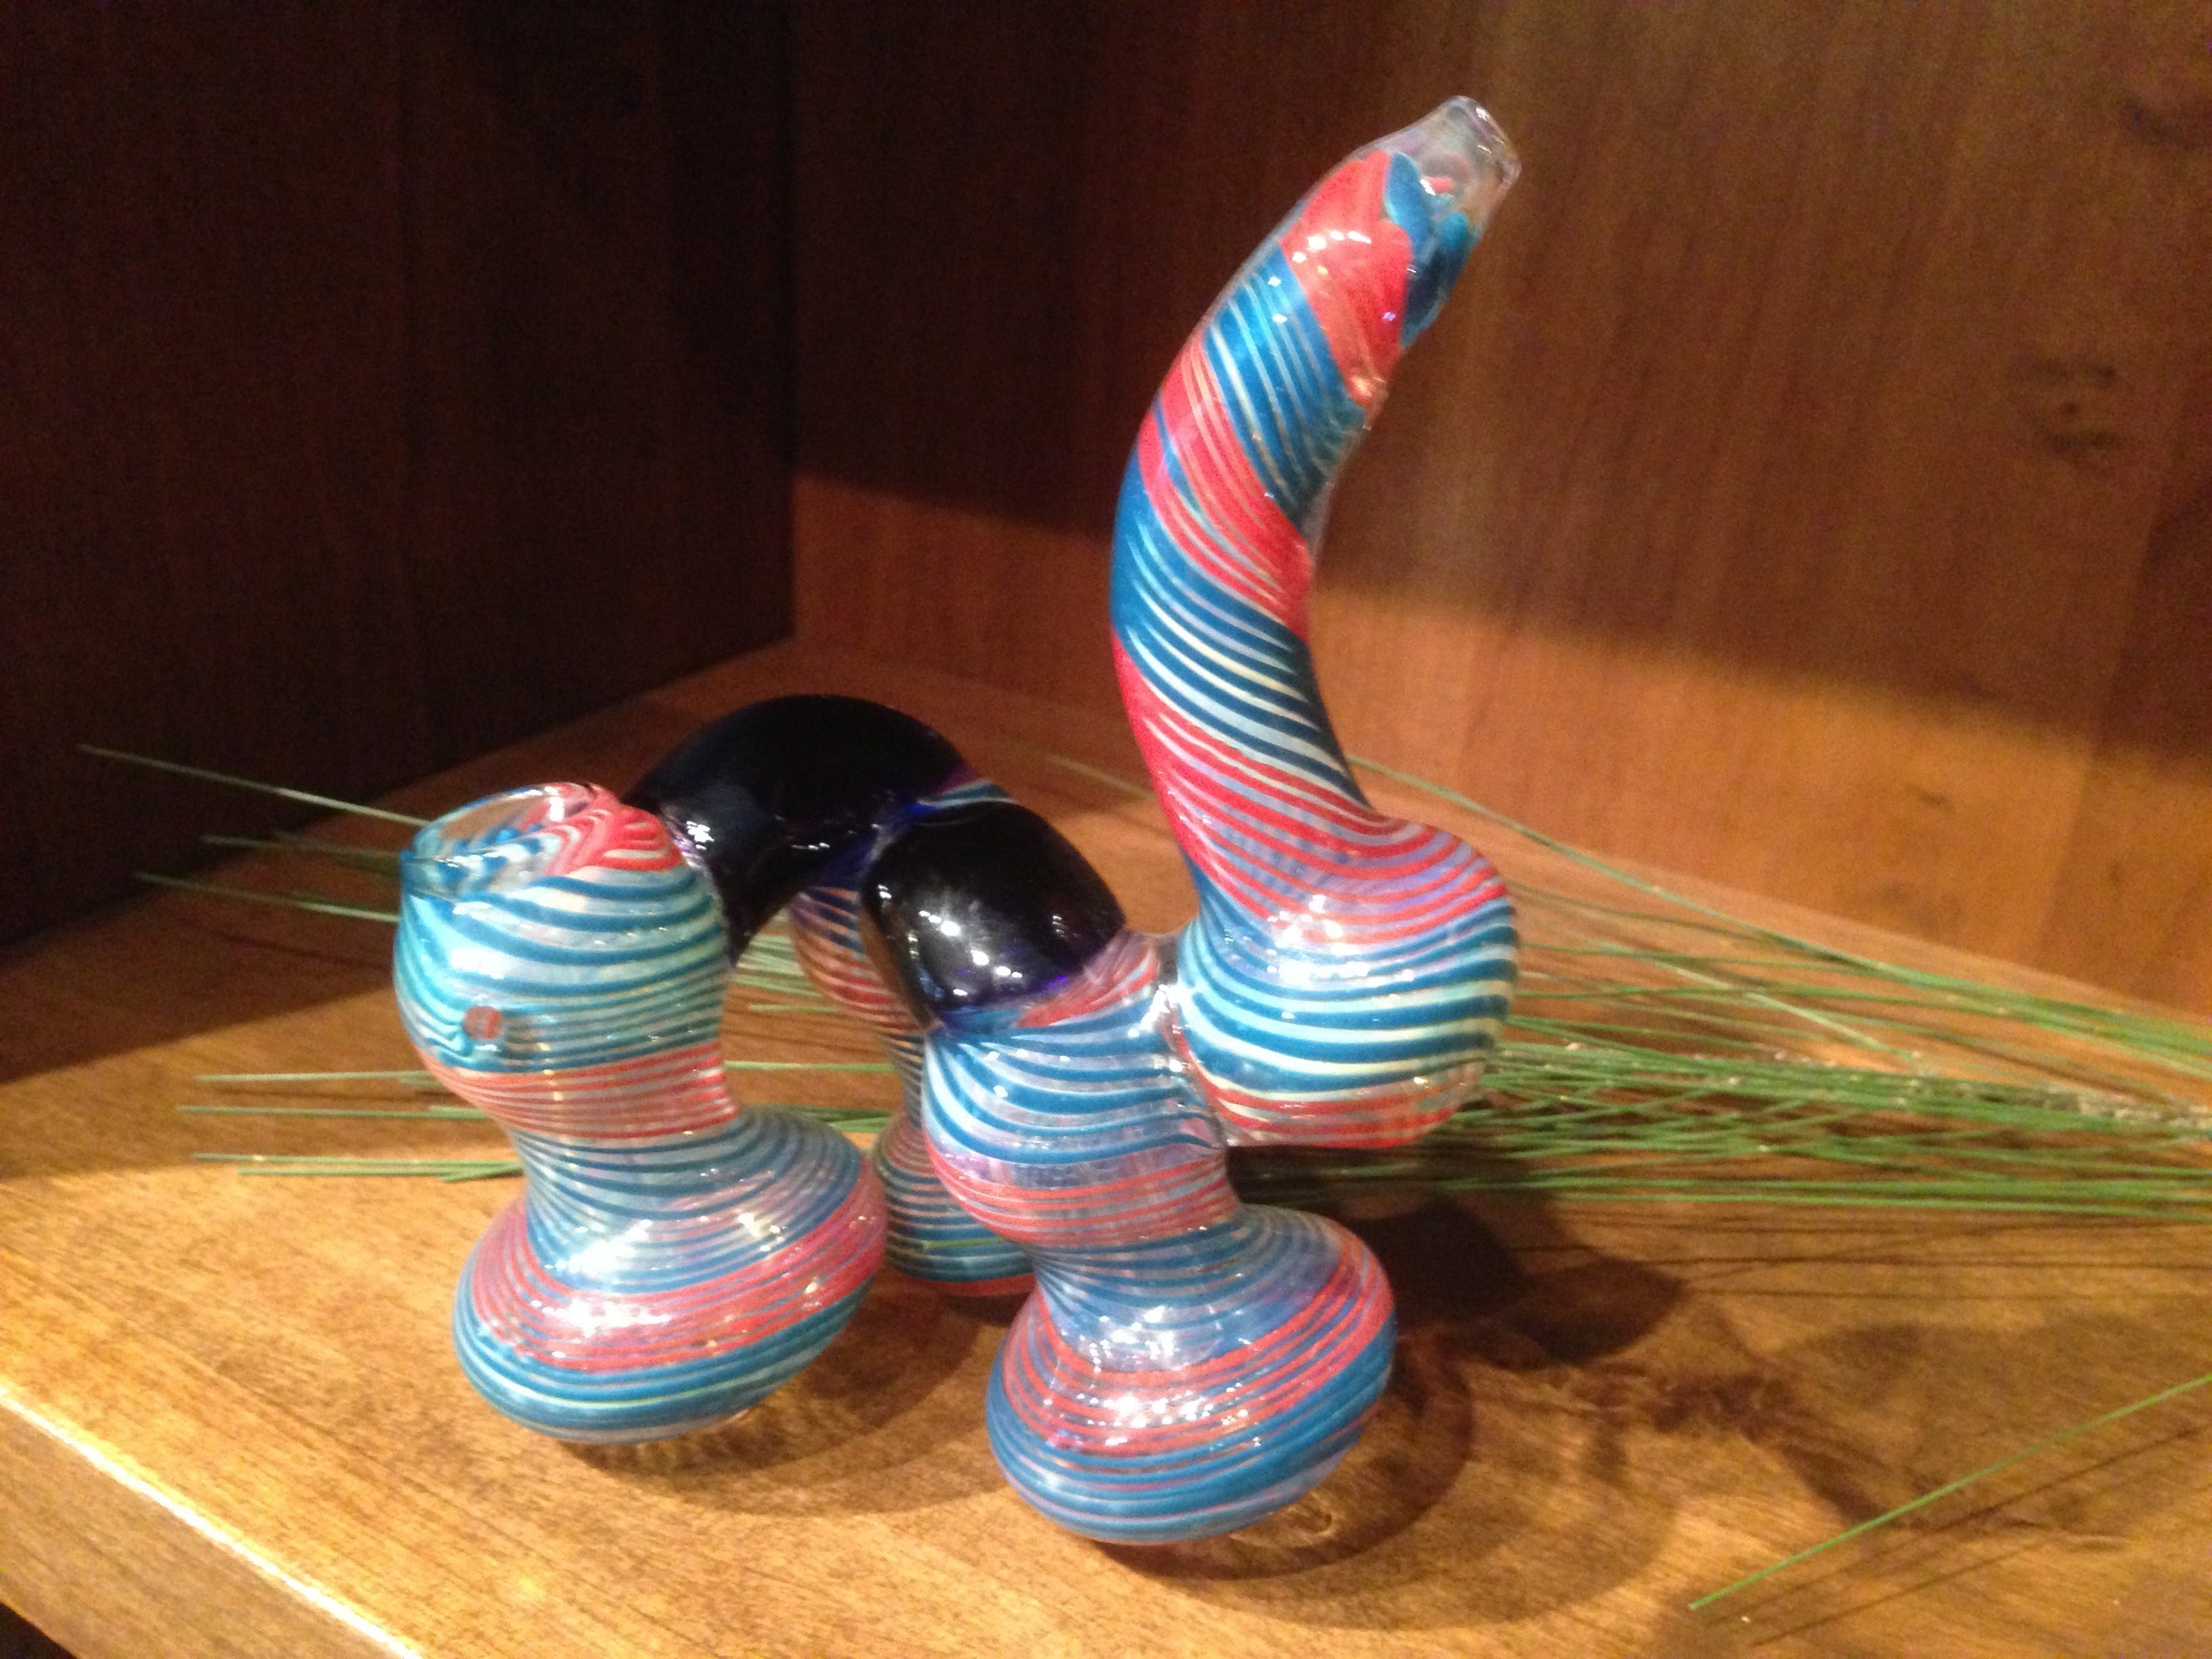 Novelty Pipes